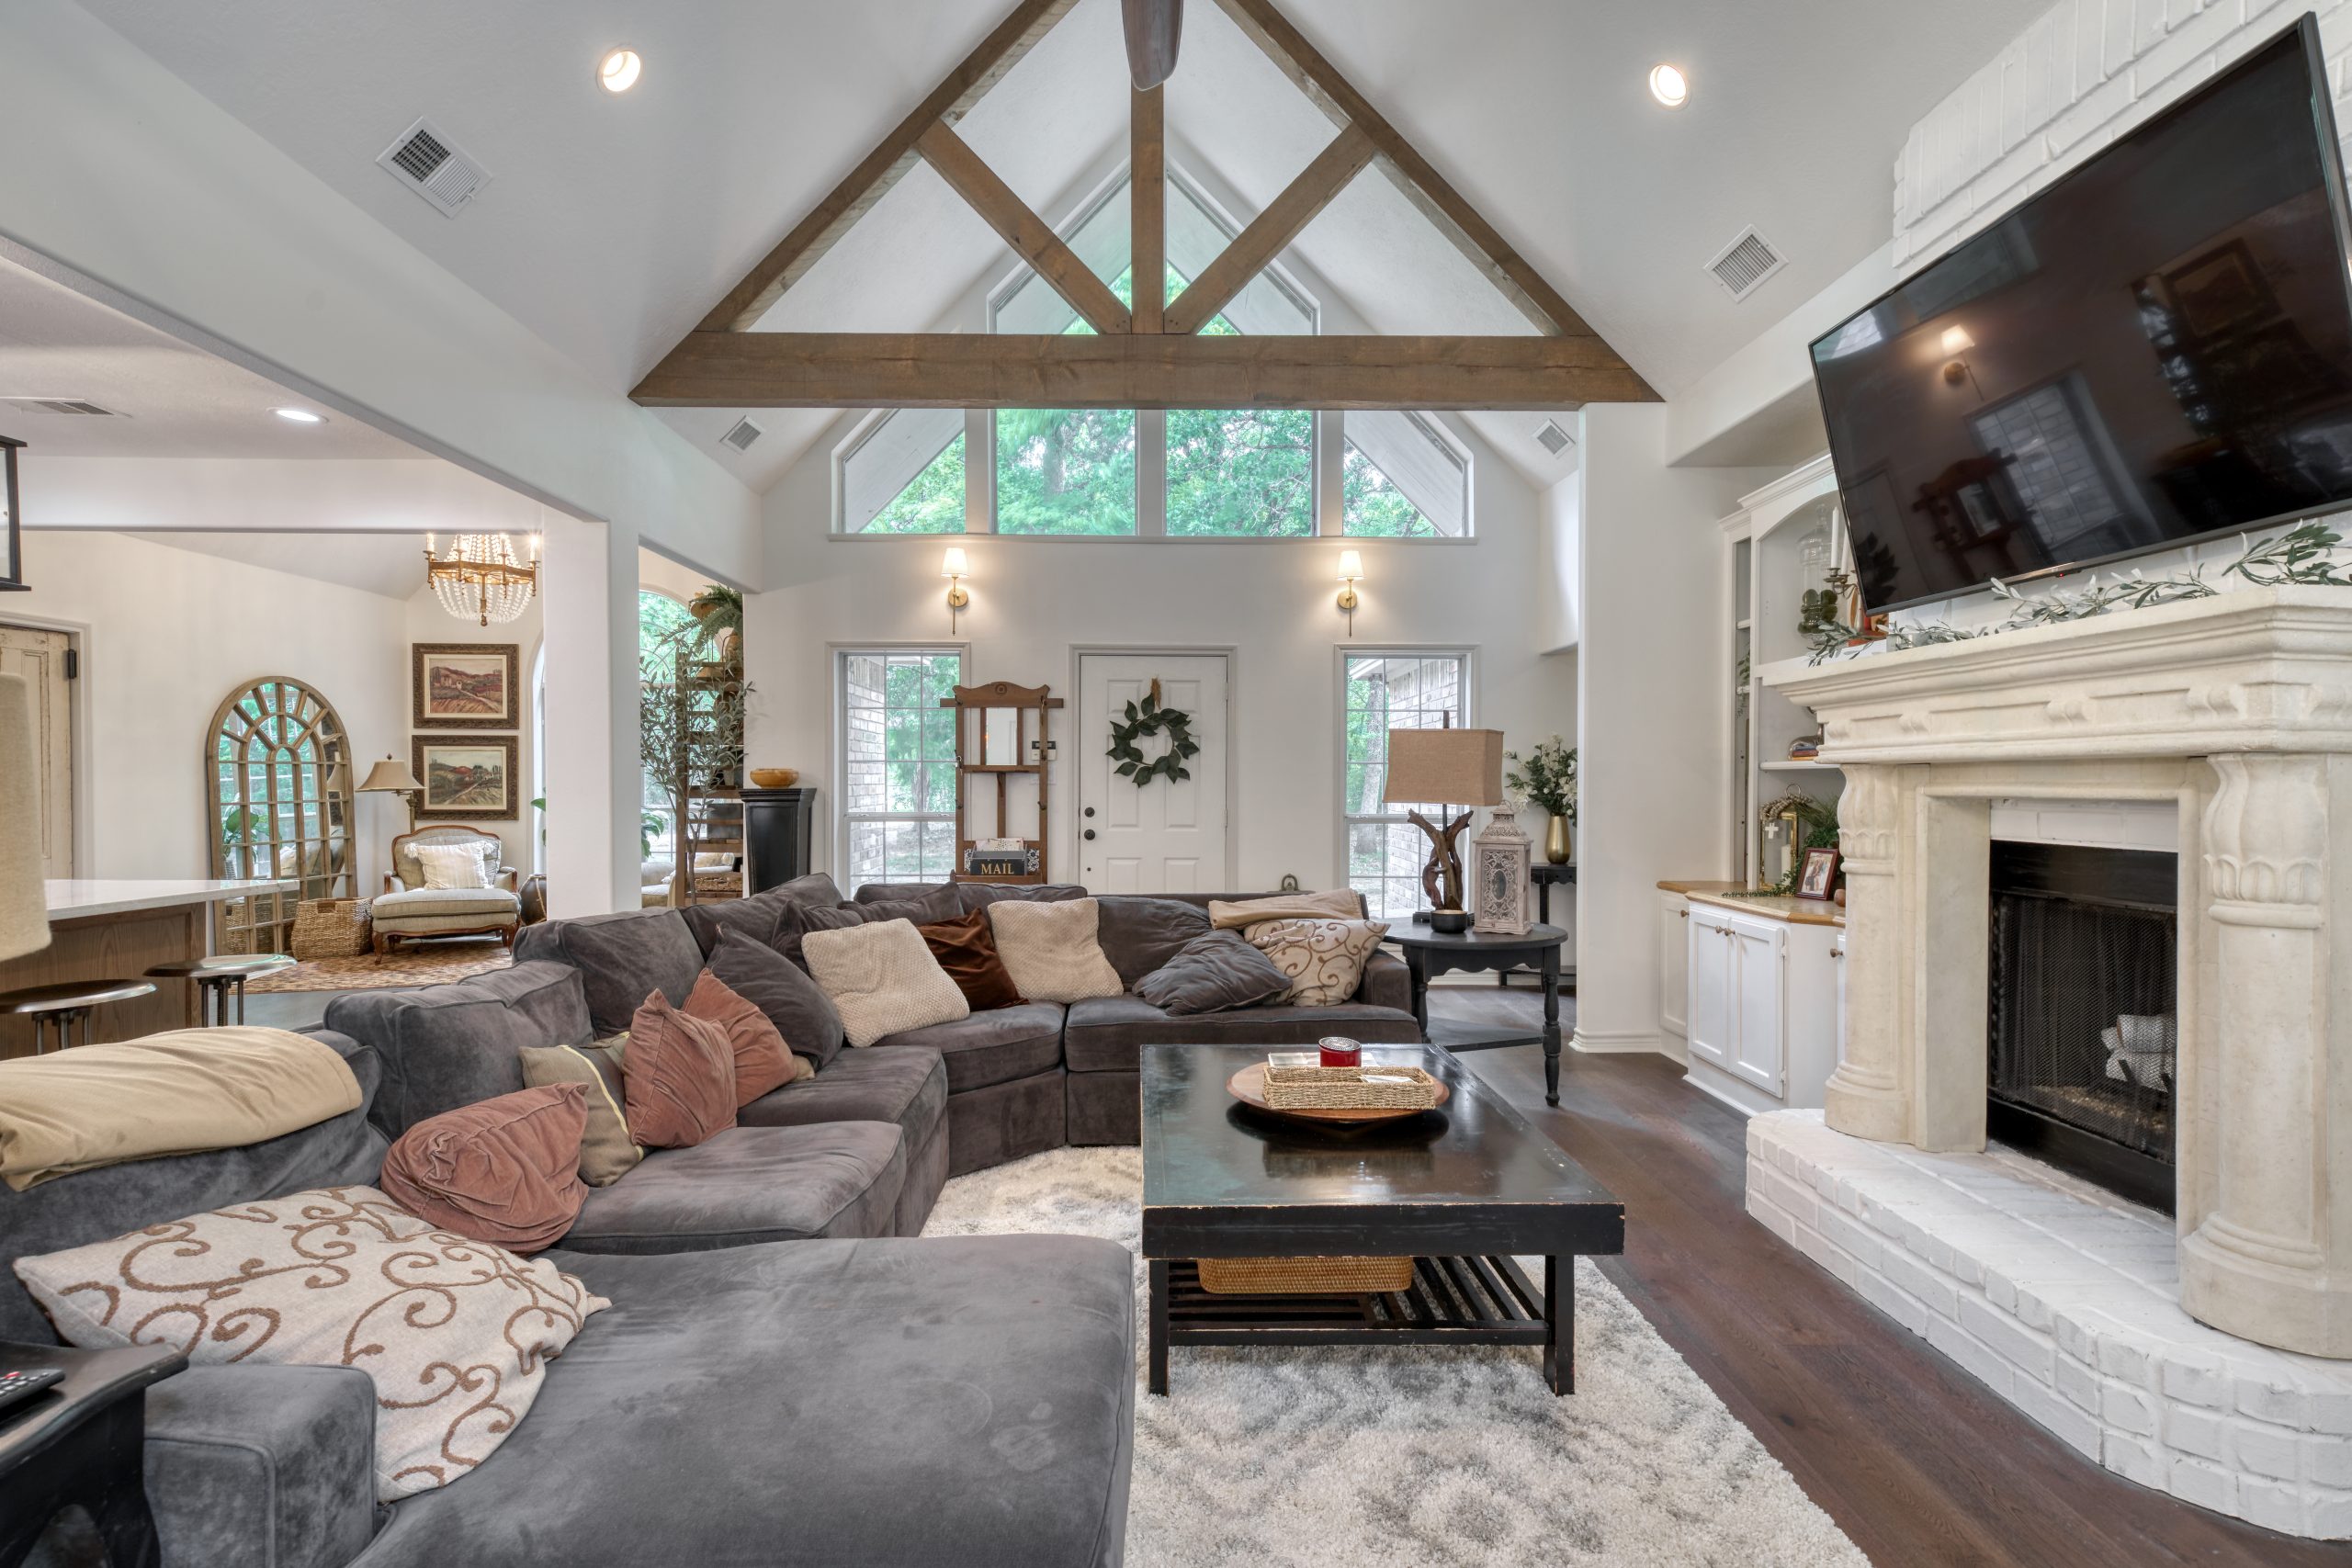 Good Company Construction in Bryan, Texas - Image of Remodeled Living room